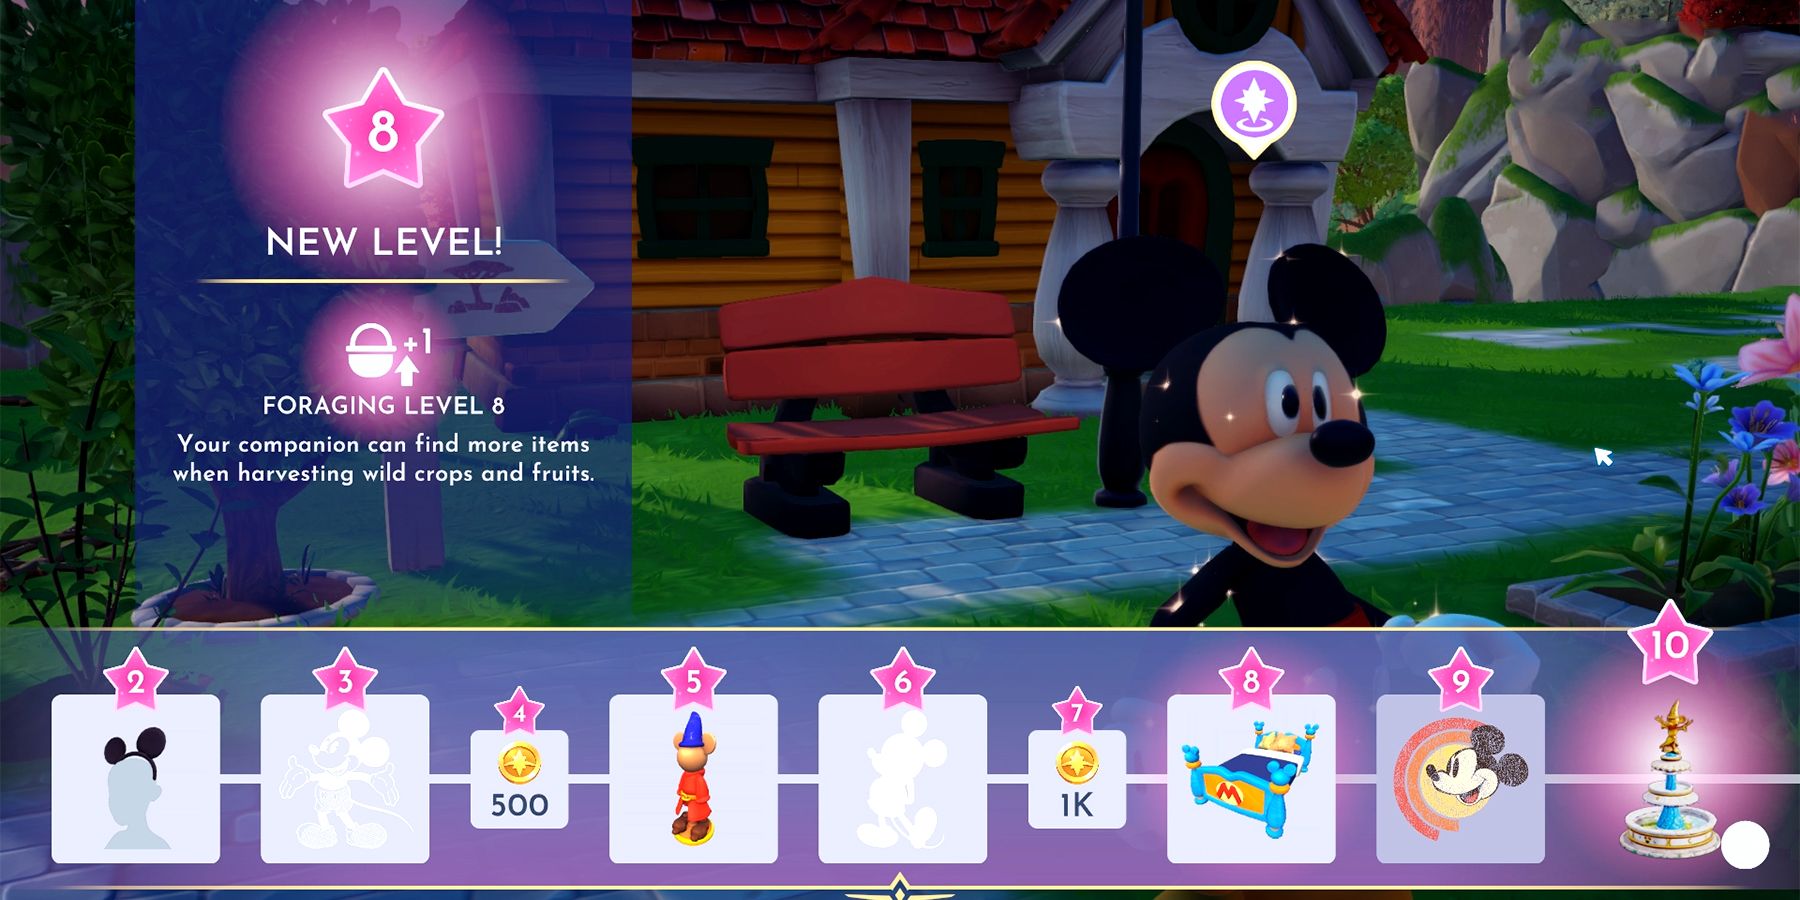 How To Unlock Minnie Mouse In Disney Dreamlight Valley